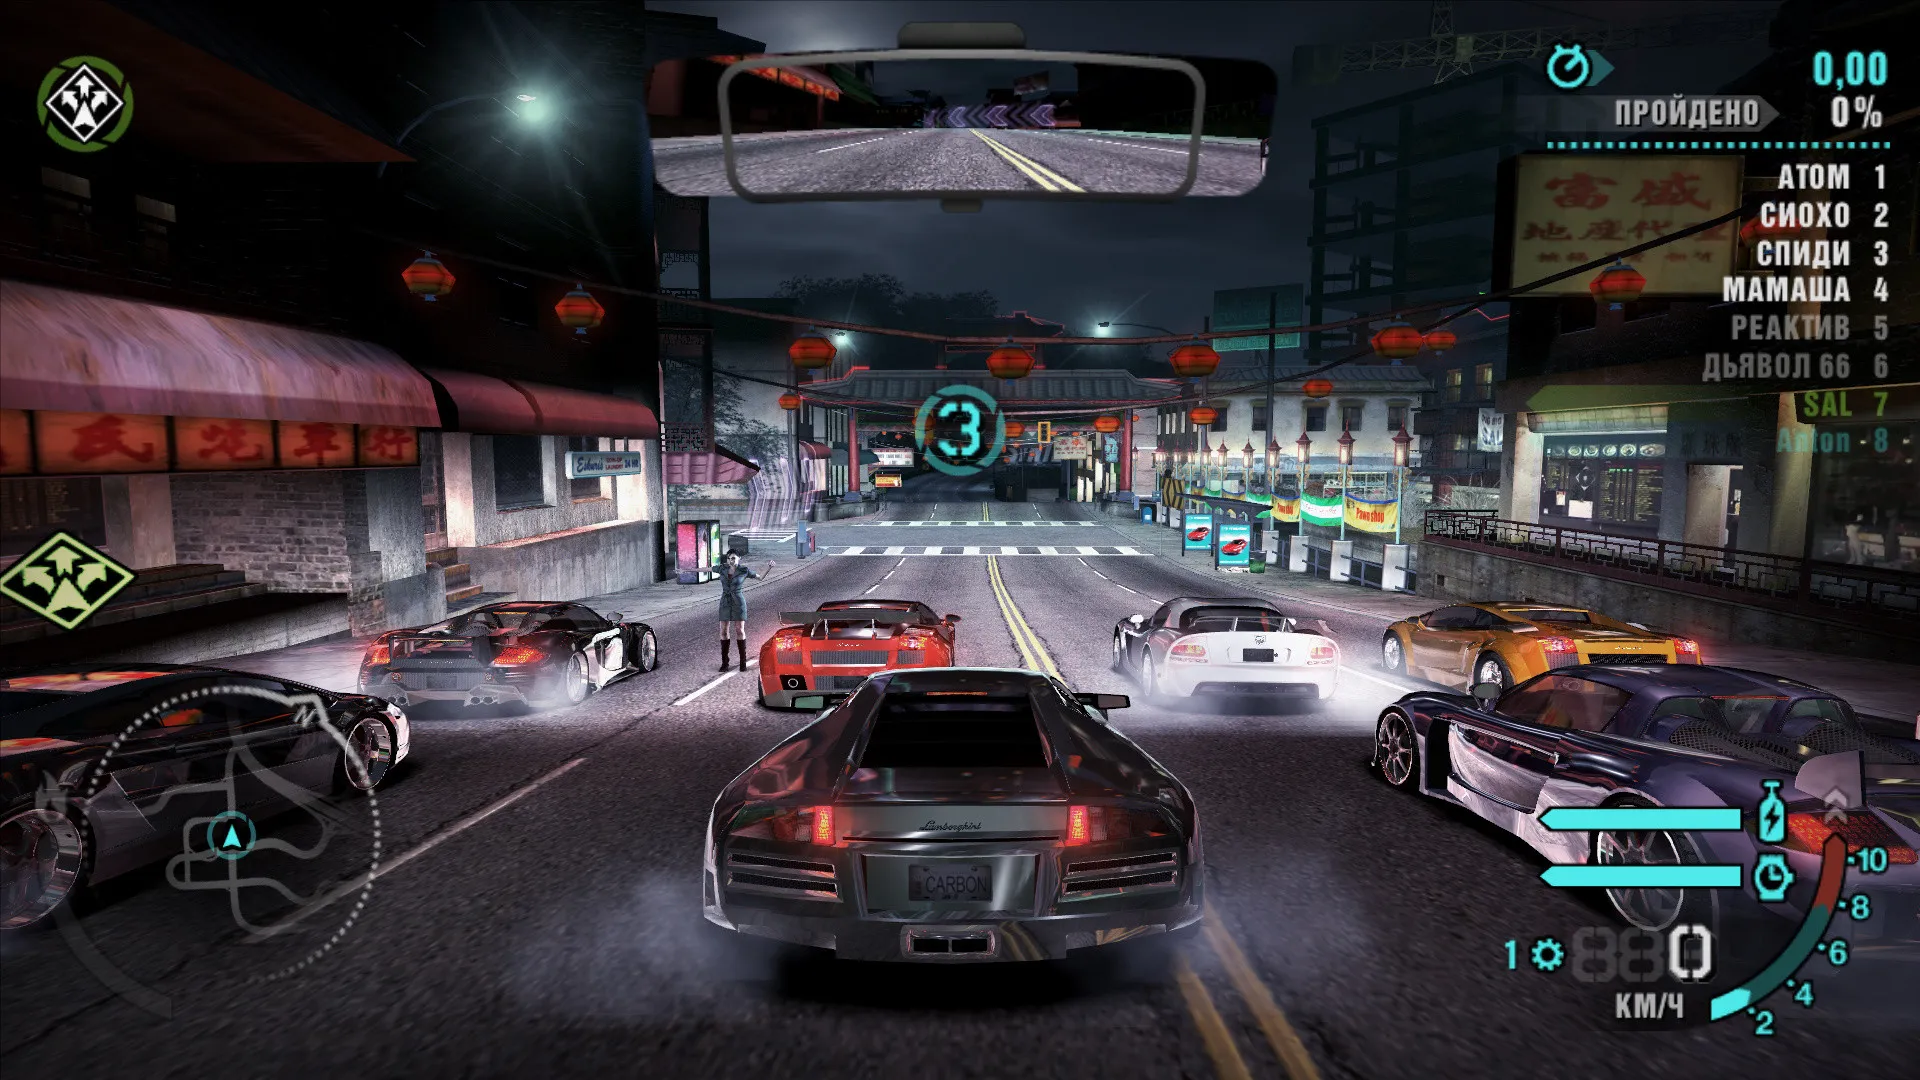 Нитро спид. Need for Speed: Carbon. Need for Speed карбон. Need for Speed Carbon 2013. NFS Carbon Widescreen Fix.